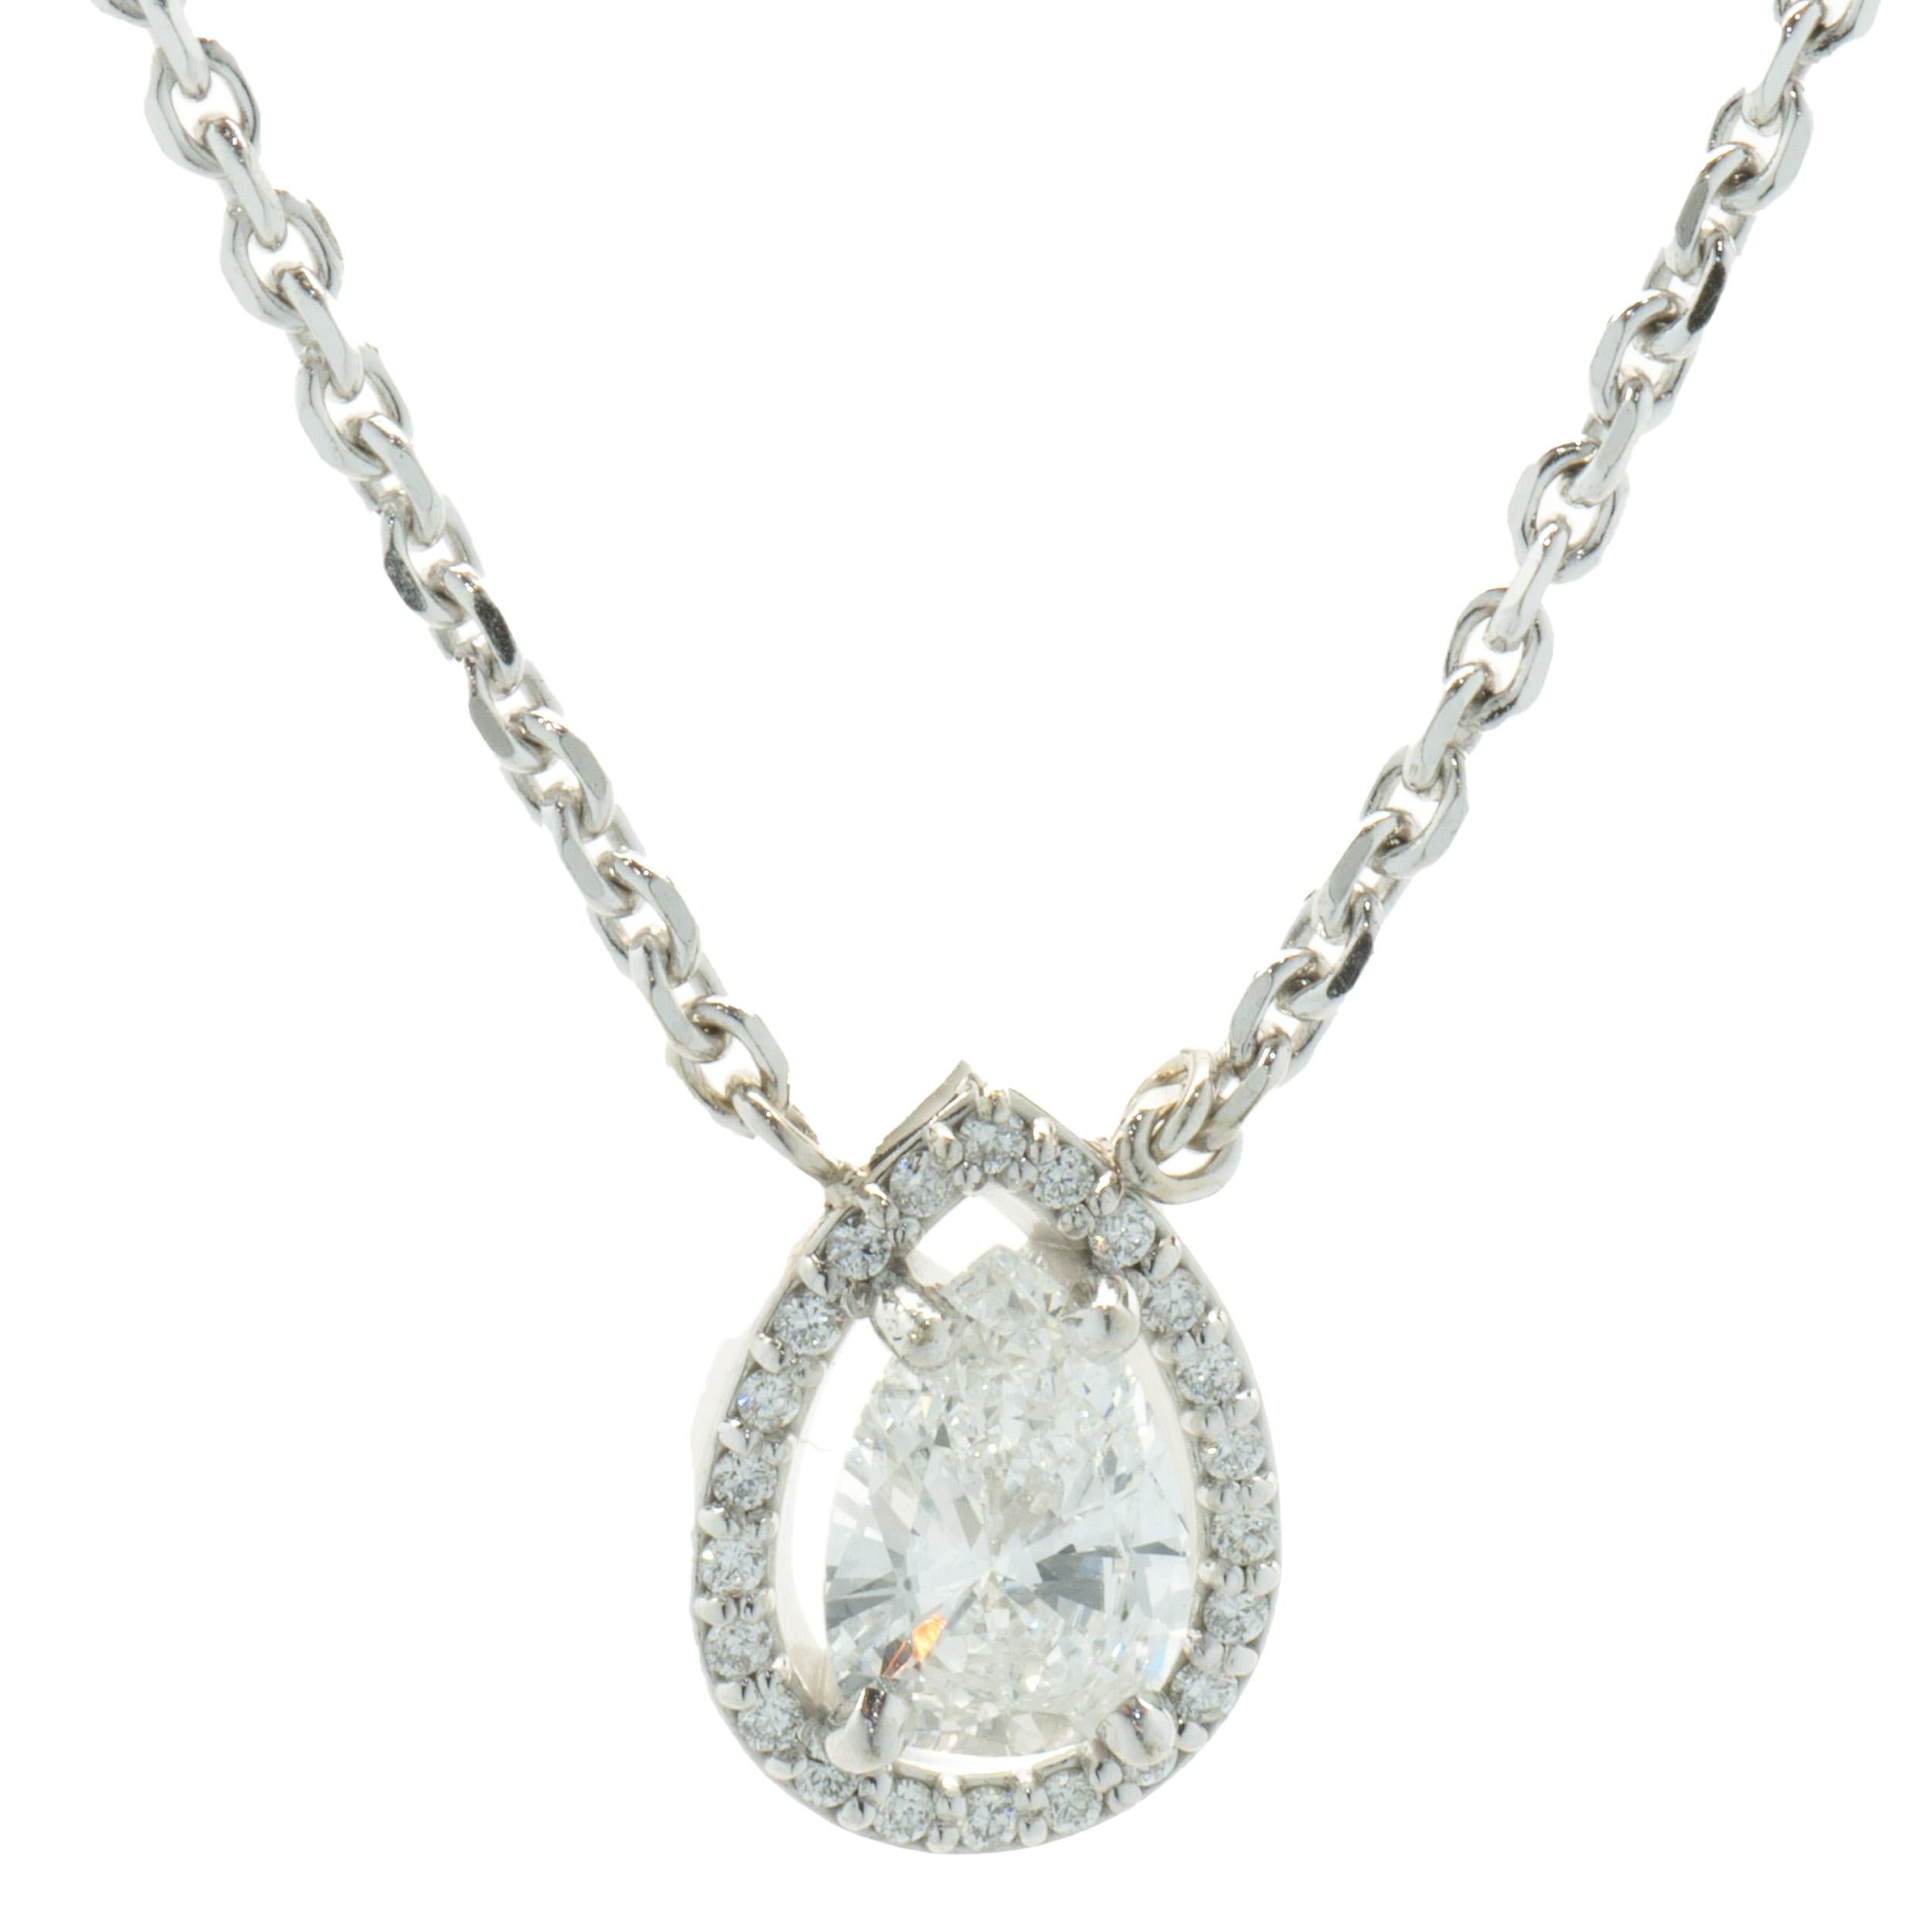 Designer: custom
Material: 14K white gold
Diamonds: 1 pear cut = 0.87ct
Color: G
Clarity: SI1
Diamonds: 20 round brilliant cut = 0.10cttw
Color: G
Clarity: VS1-2
Dimensions: necklace measures 18-inches in length 
Weight: 1.79 grams